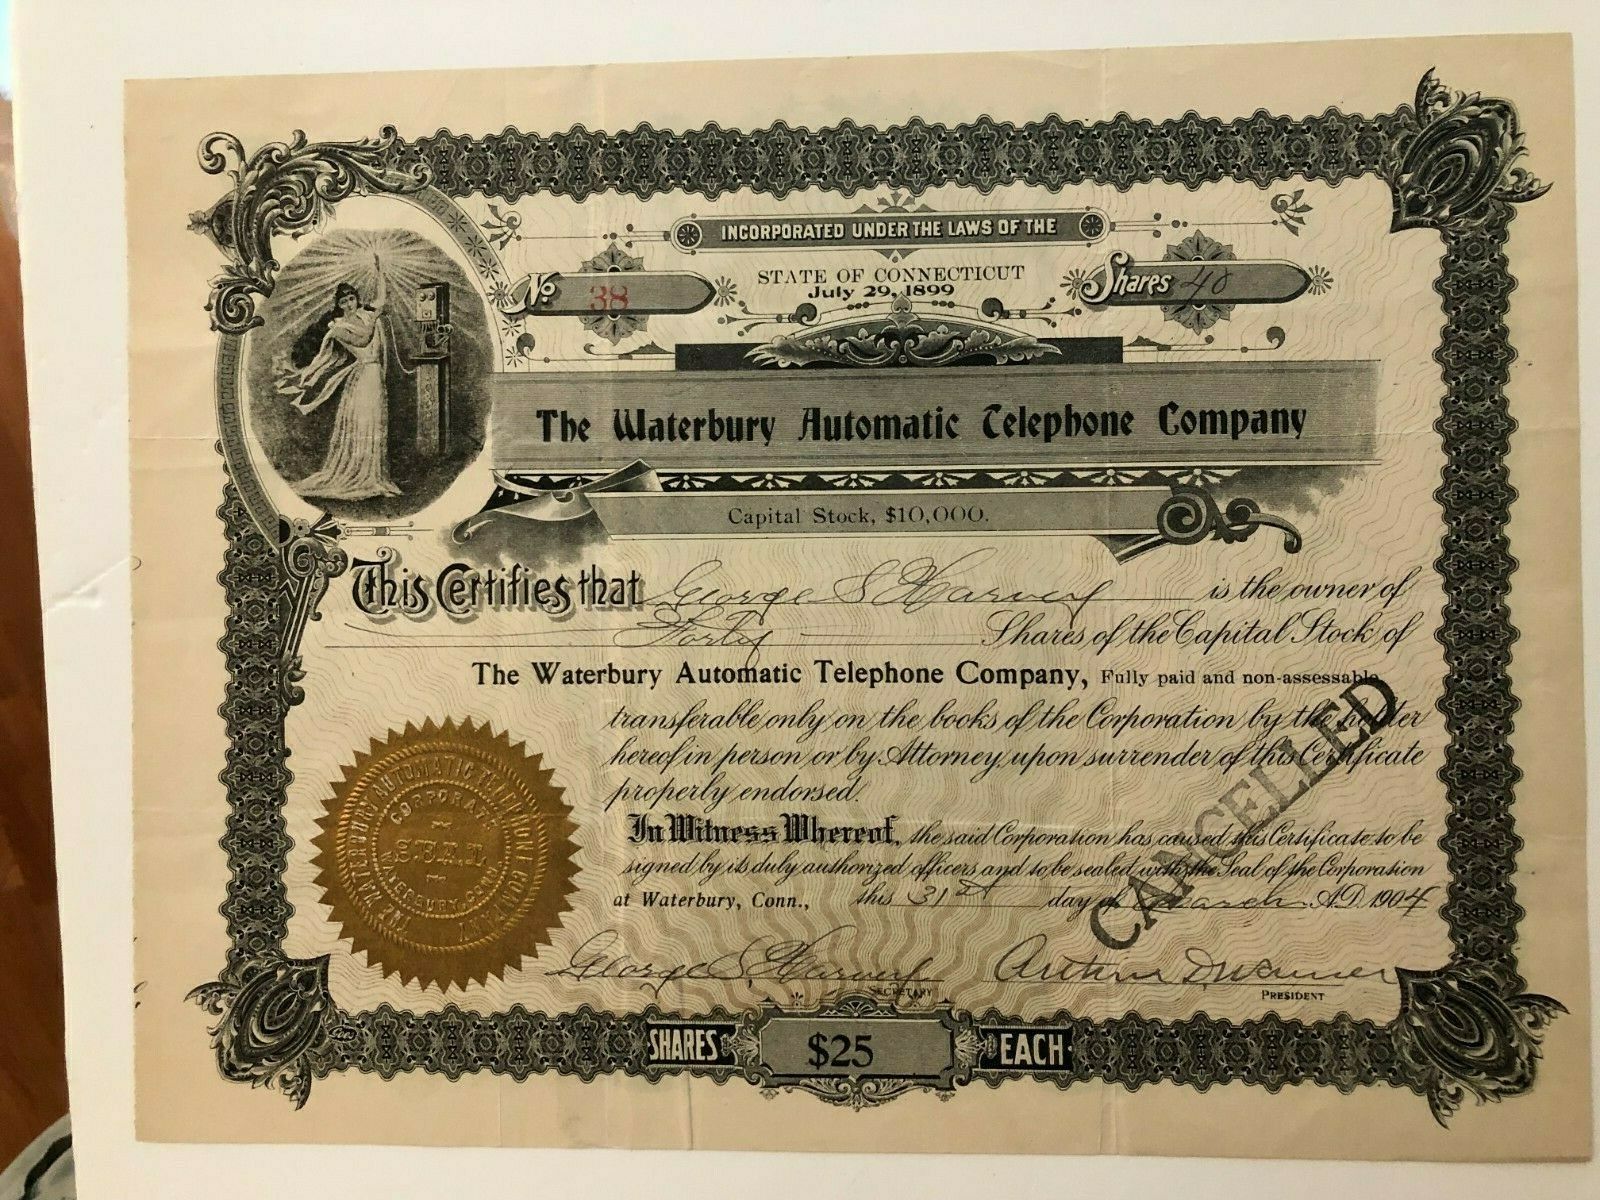 1904 Waterbury Automatic Telephone Co. Stock Certificate, Connecticut